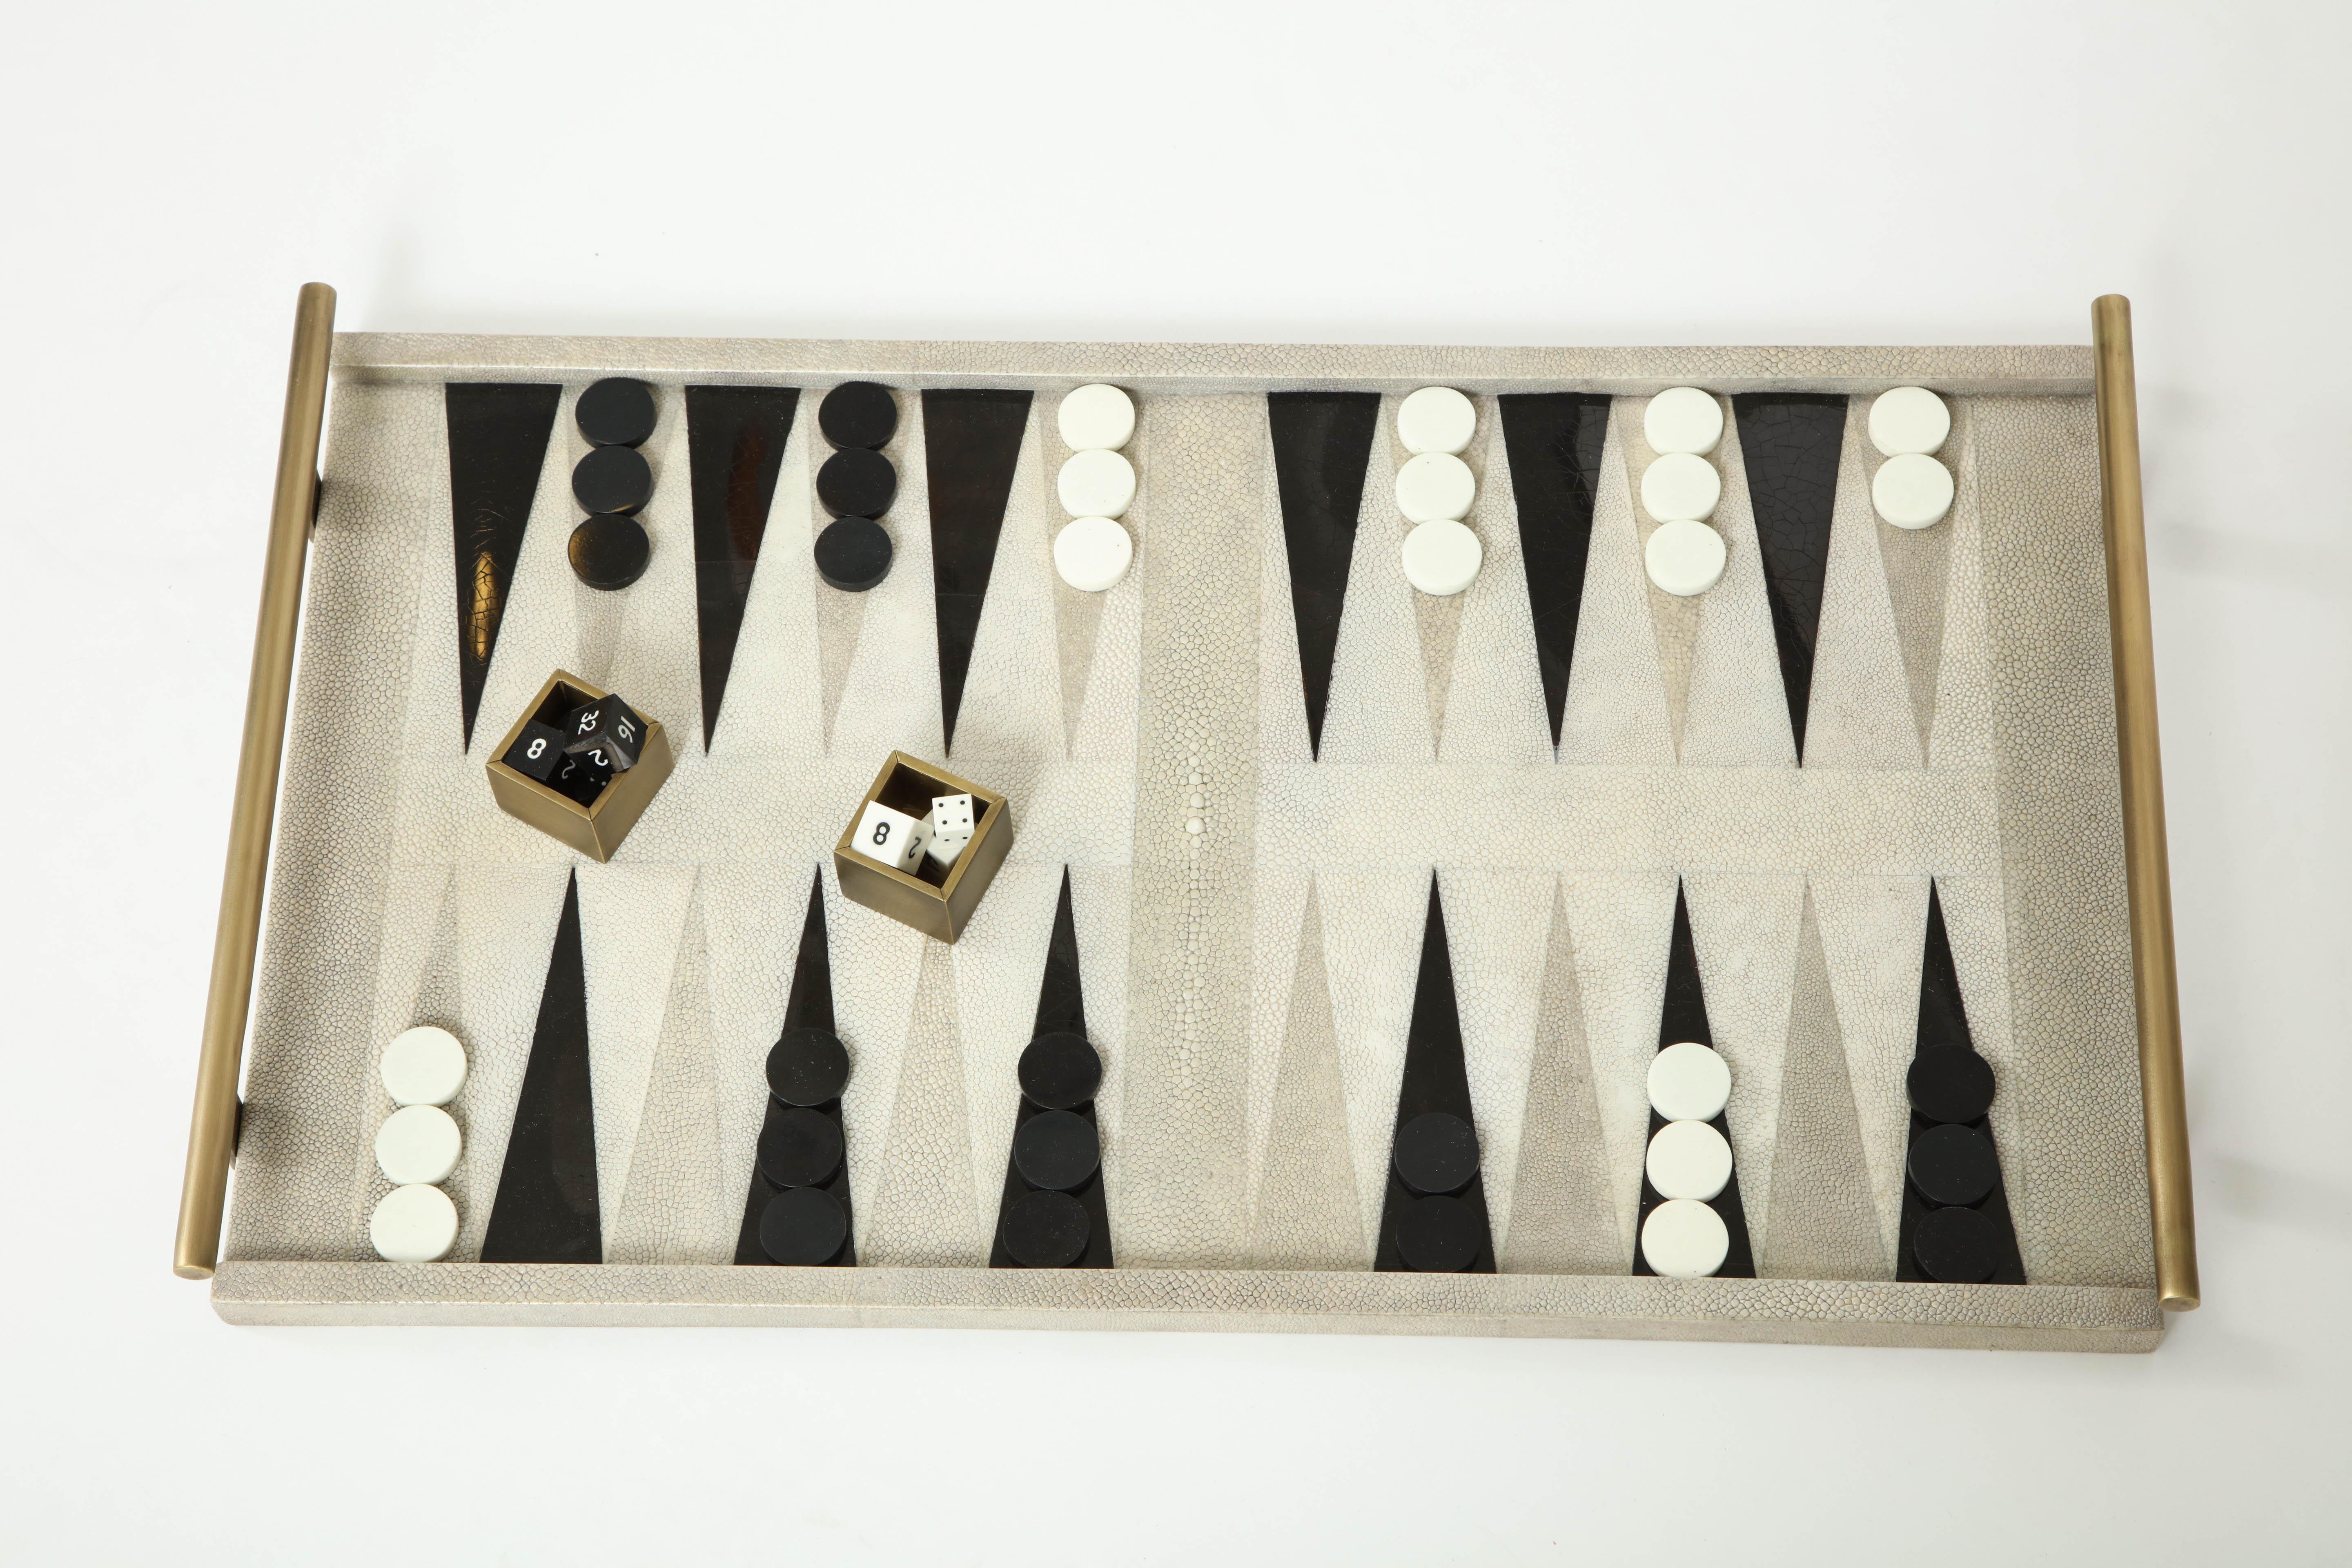 Decorative backgammon game made of shagreen, black sea shell and brass details.
Delivery time is about 8-10 weeks.
We have another game in stock with a darker shagreen. Please let us know and we will send pictures.